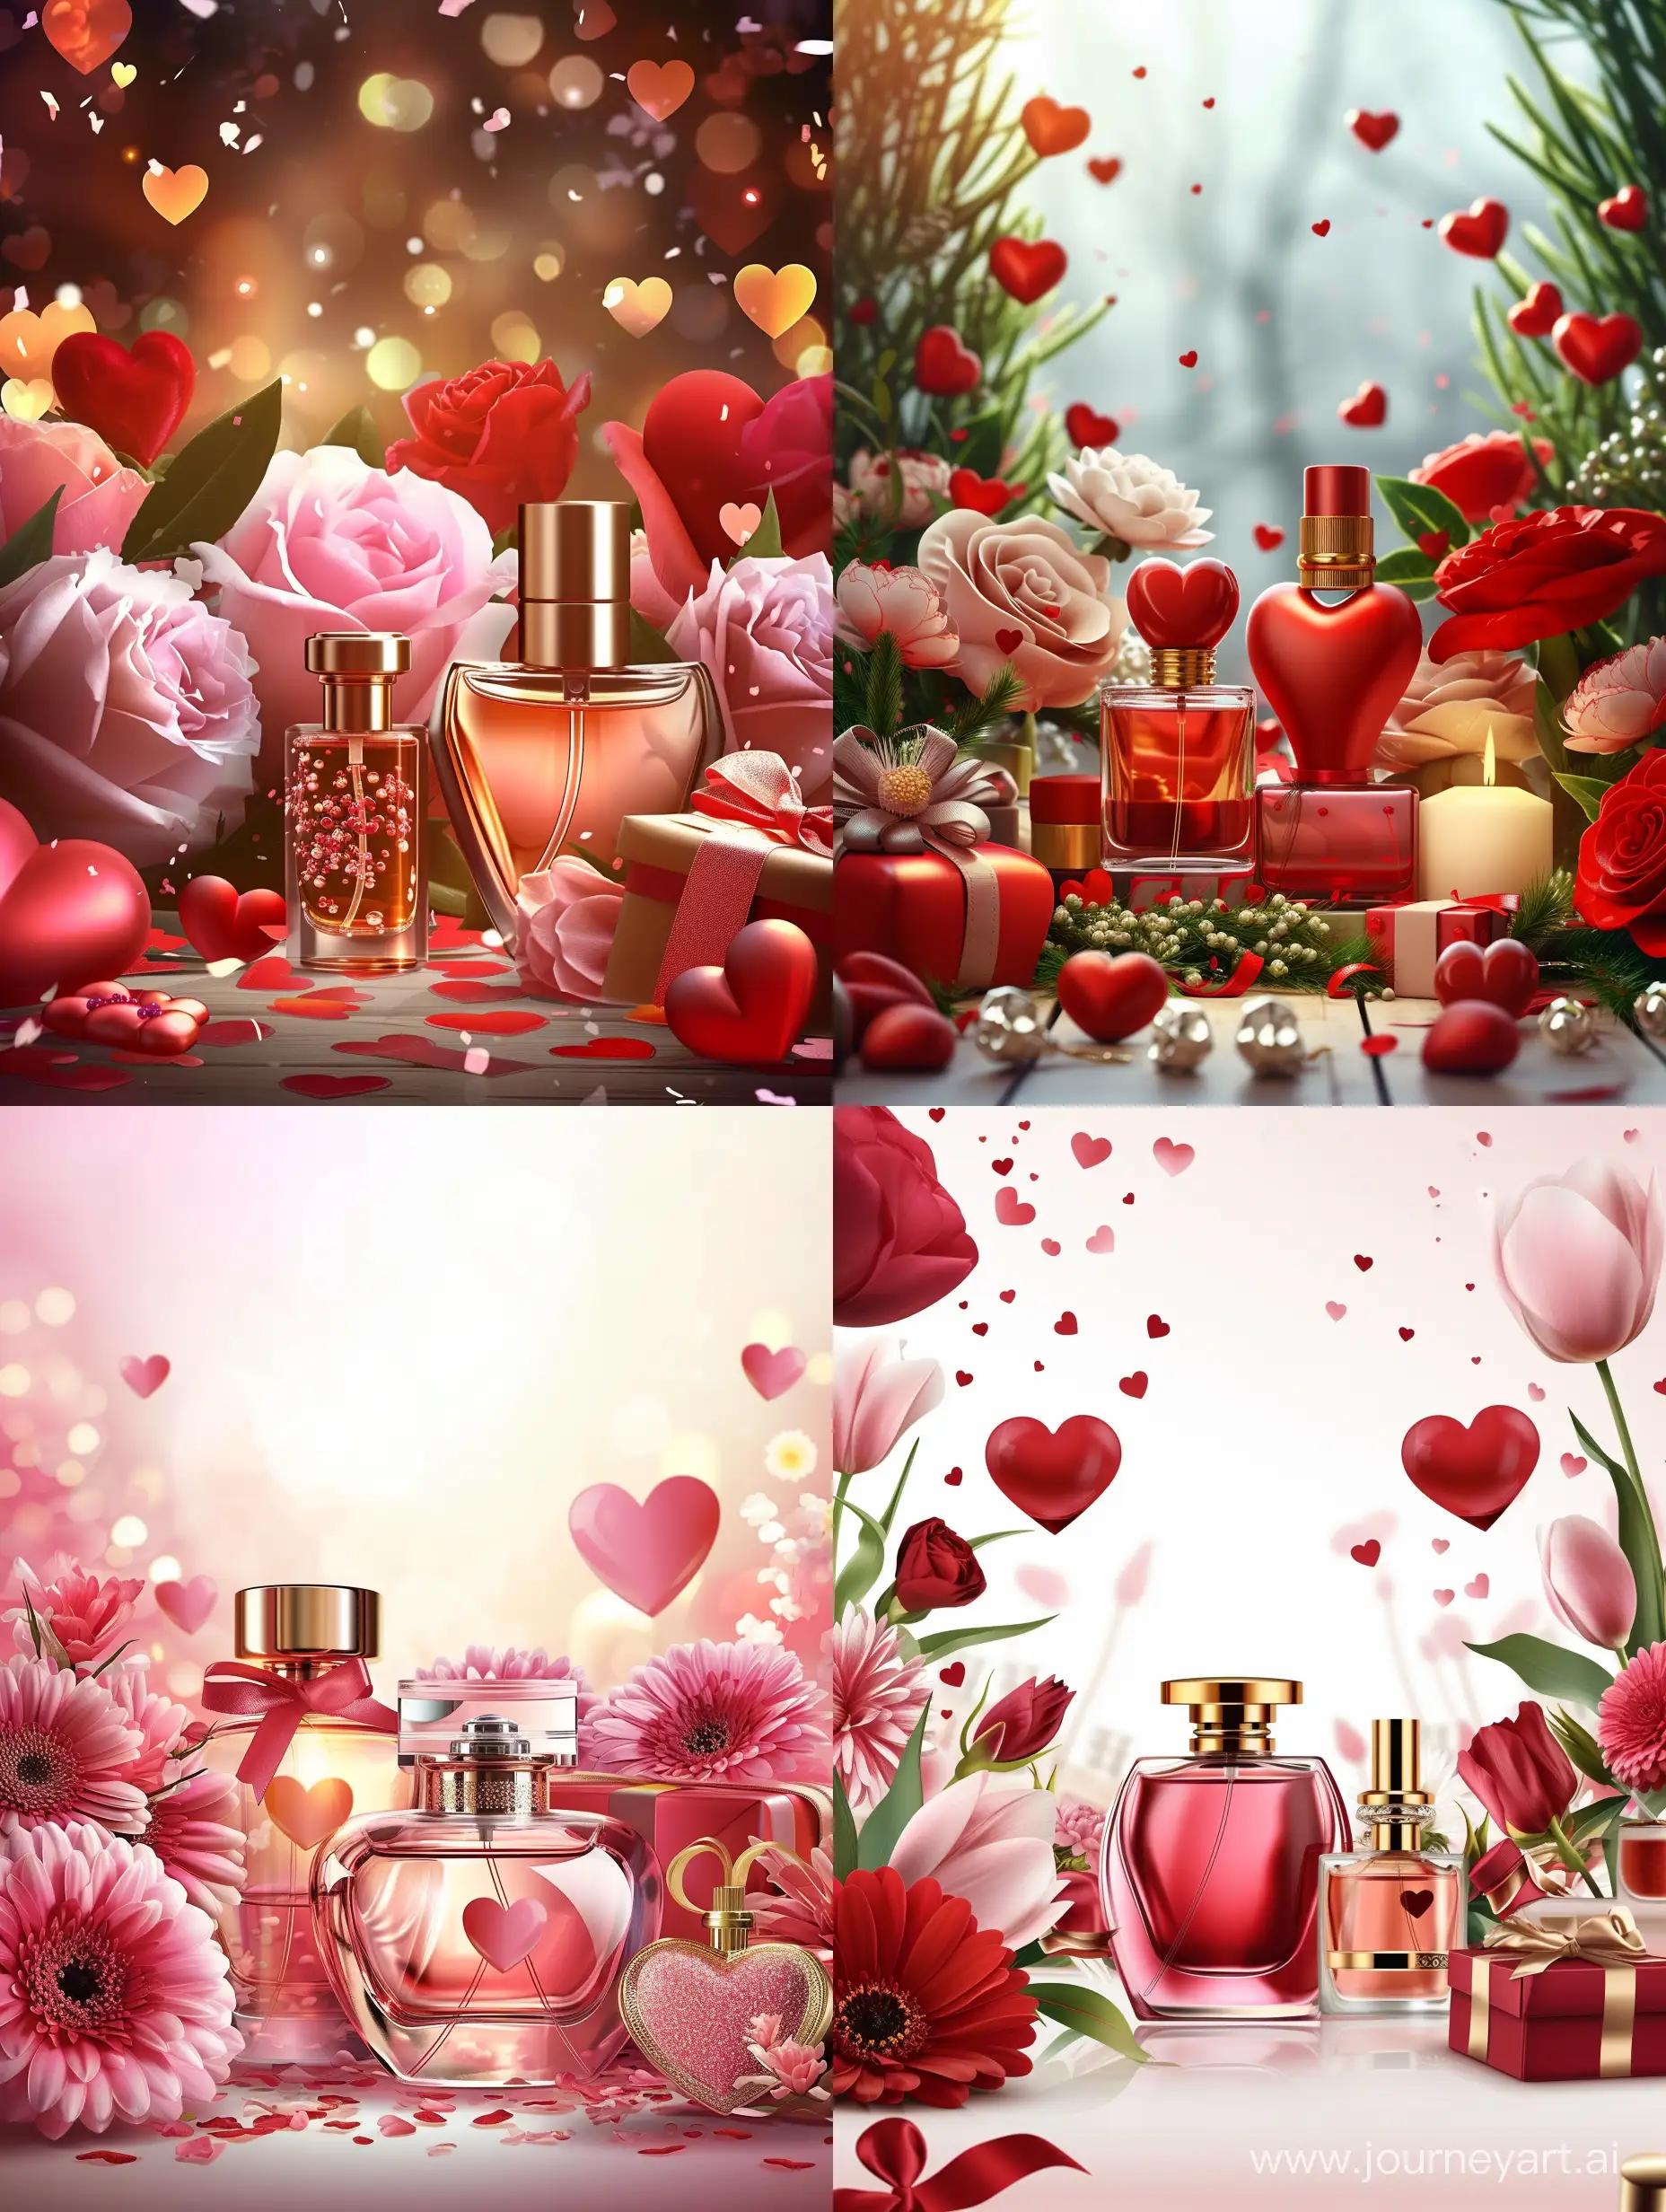 Valentine's Day, flowers, hearts, festive atmosphere, beautiful perfume bottles, gifts, realistic, detailed